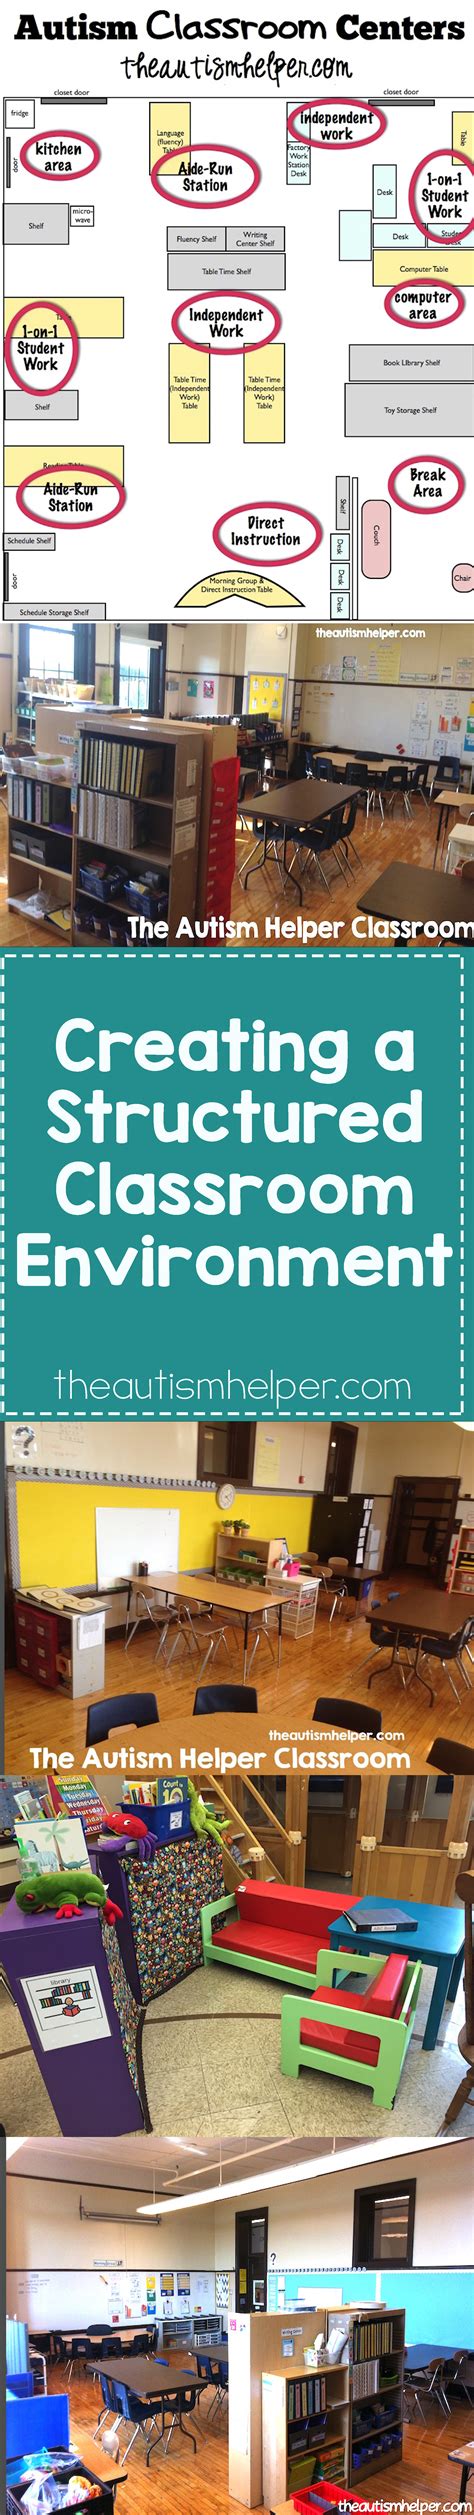 Creating a Structured Classroom Environment - The Autism Helper | Classroom, Classroom ...